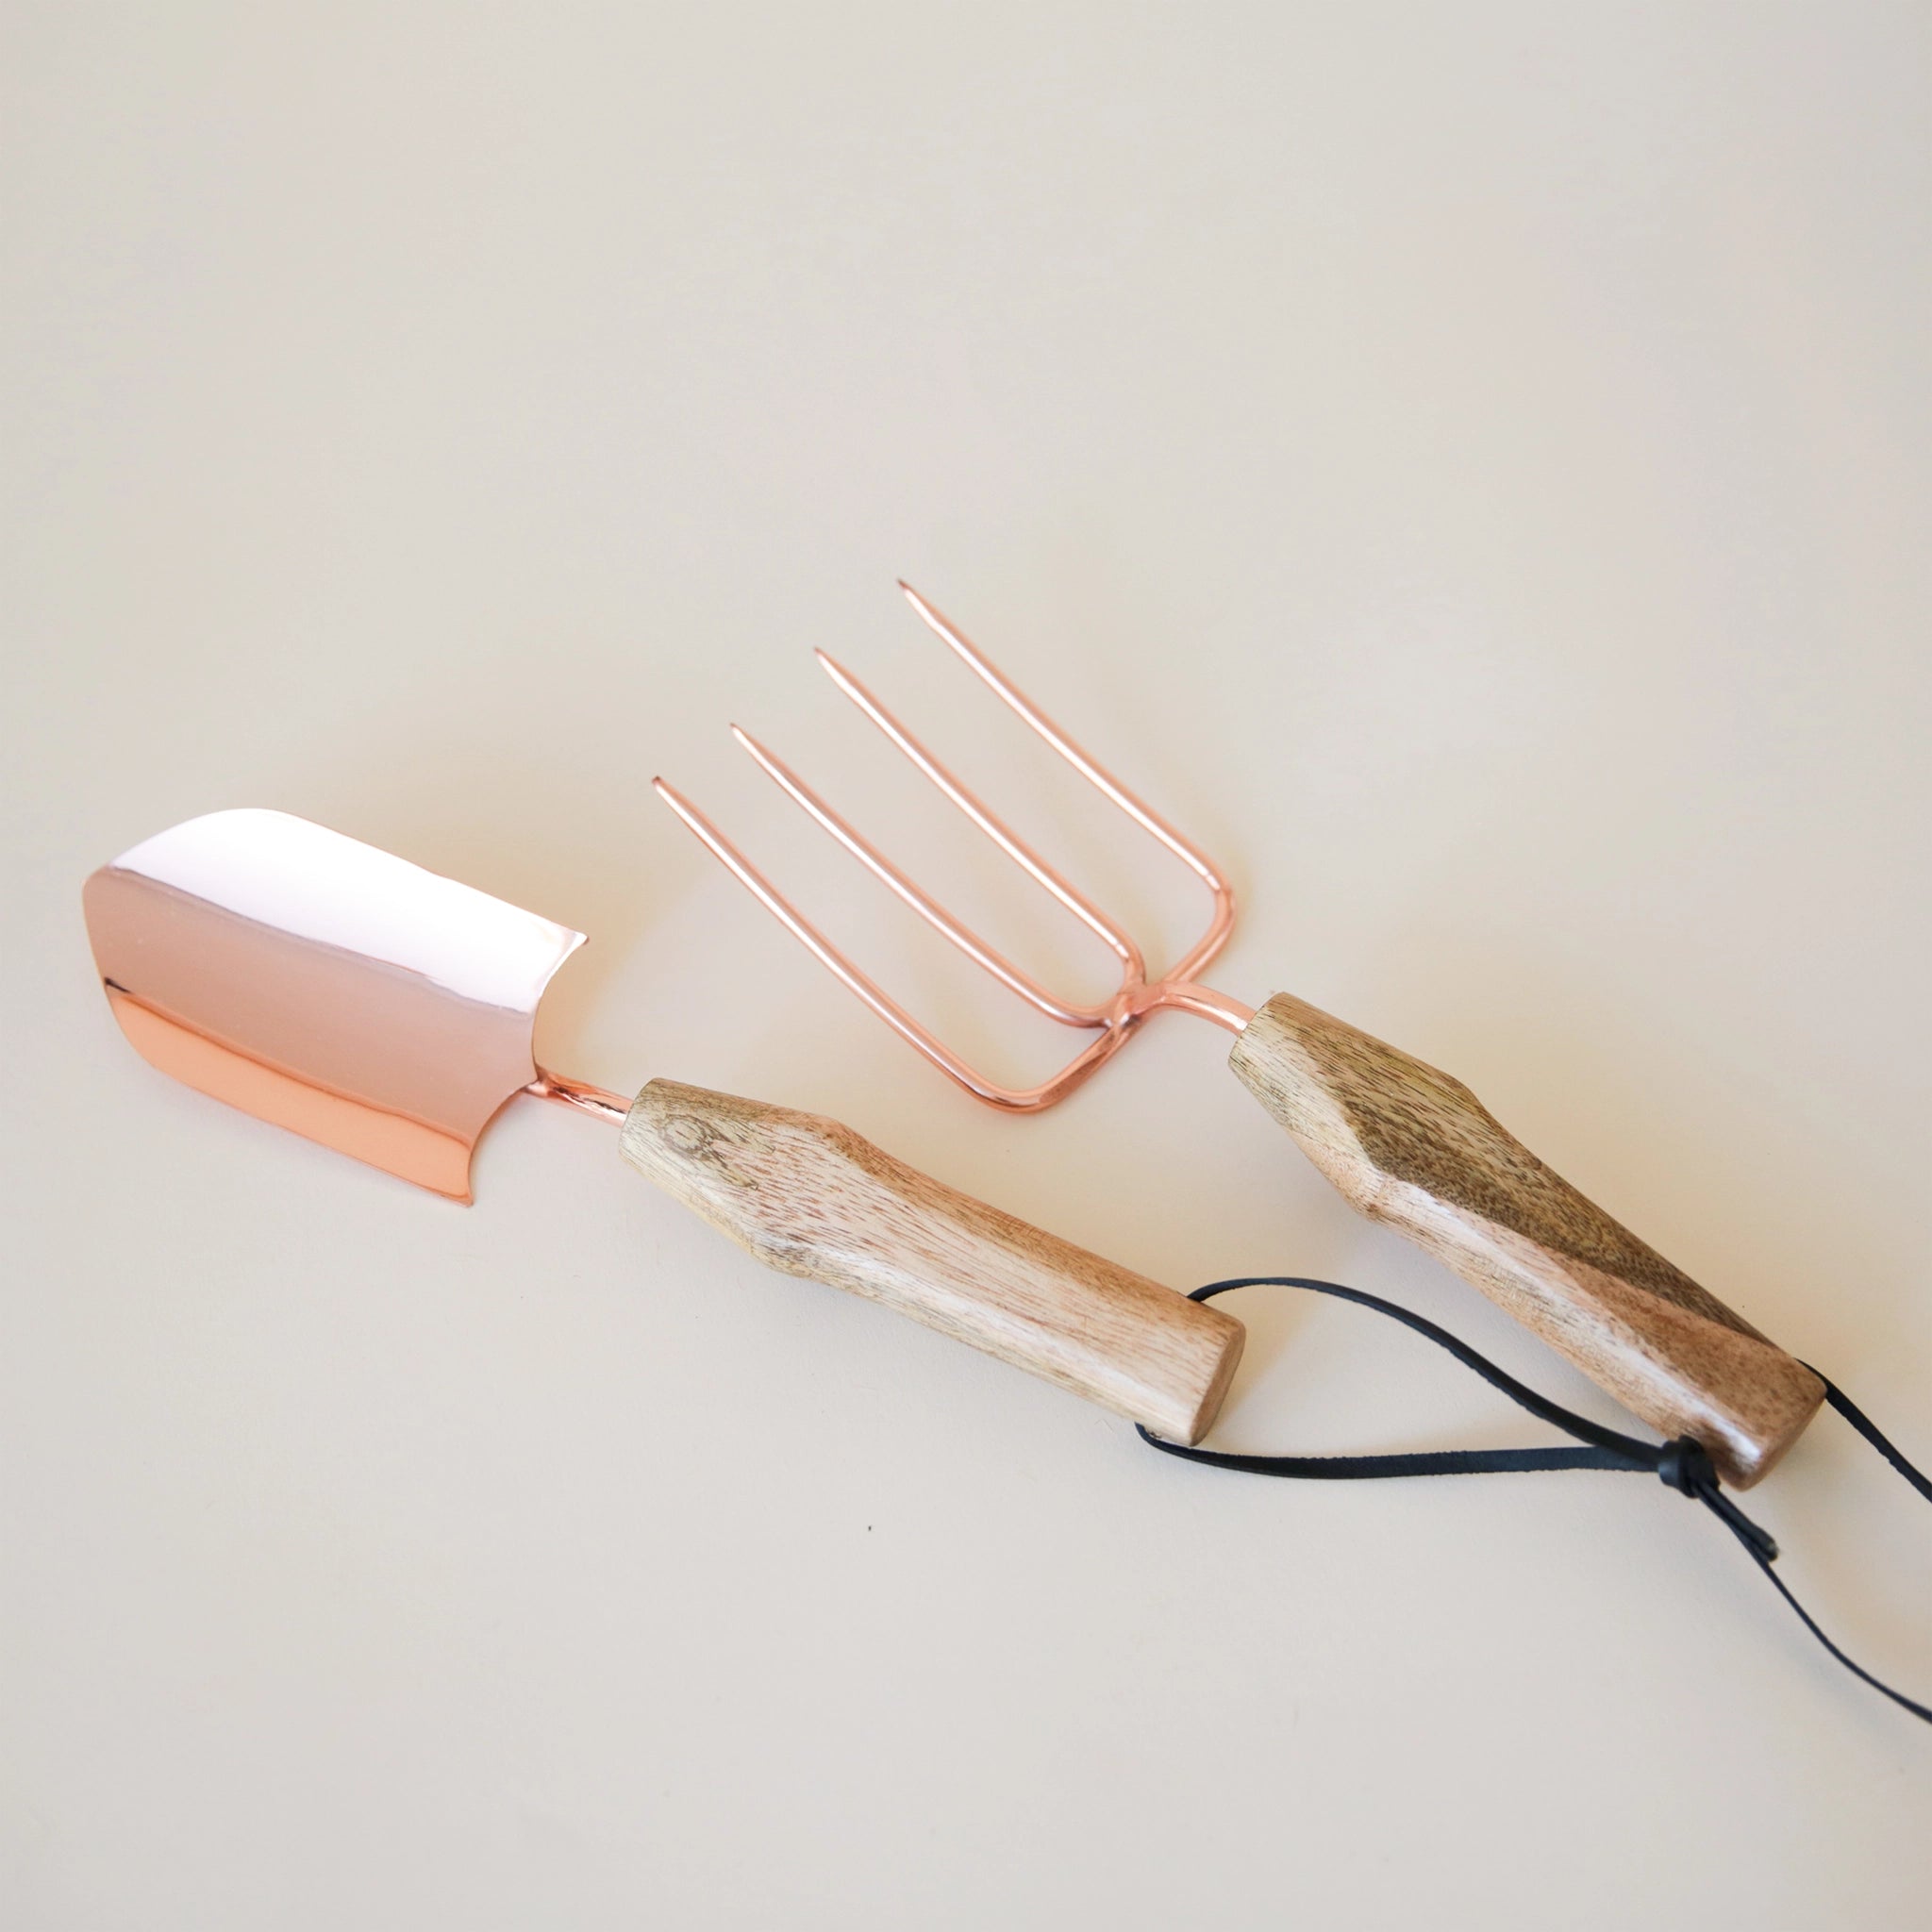 On a cream background is a set of gardening tools that have a rose gold metal, mango wood handles and black leather loops on the end. The set includes a hand shovel and a gardening fork. 